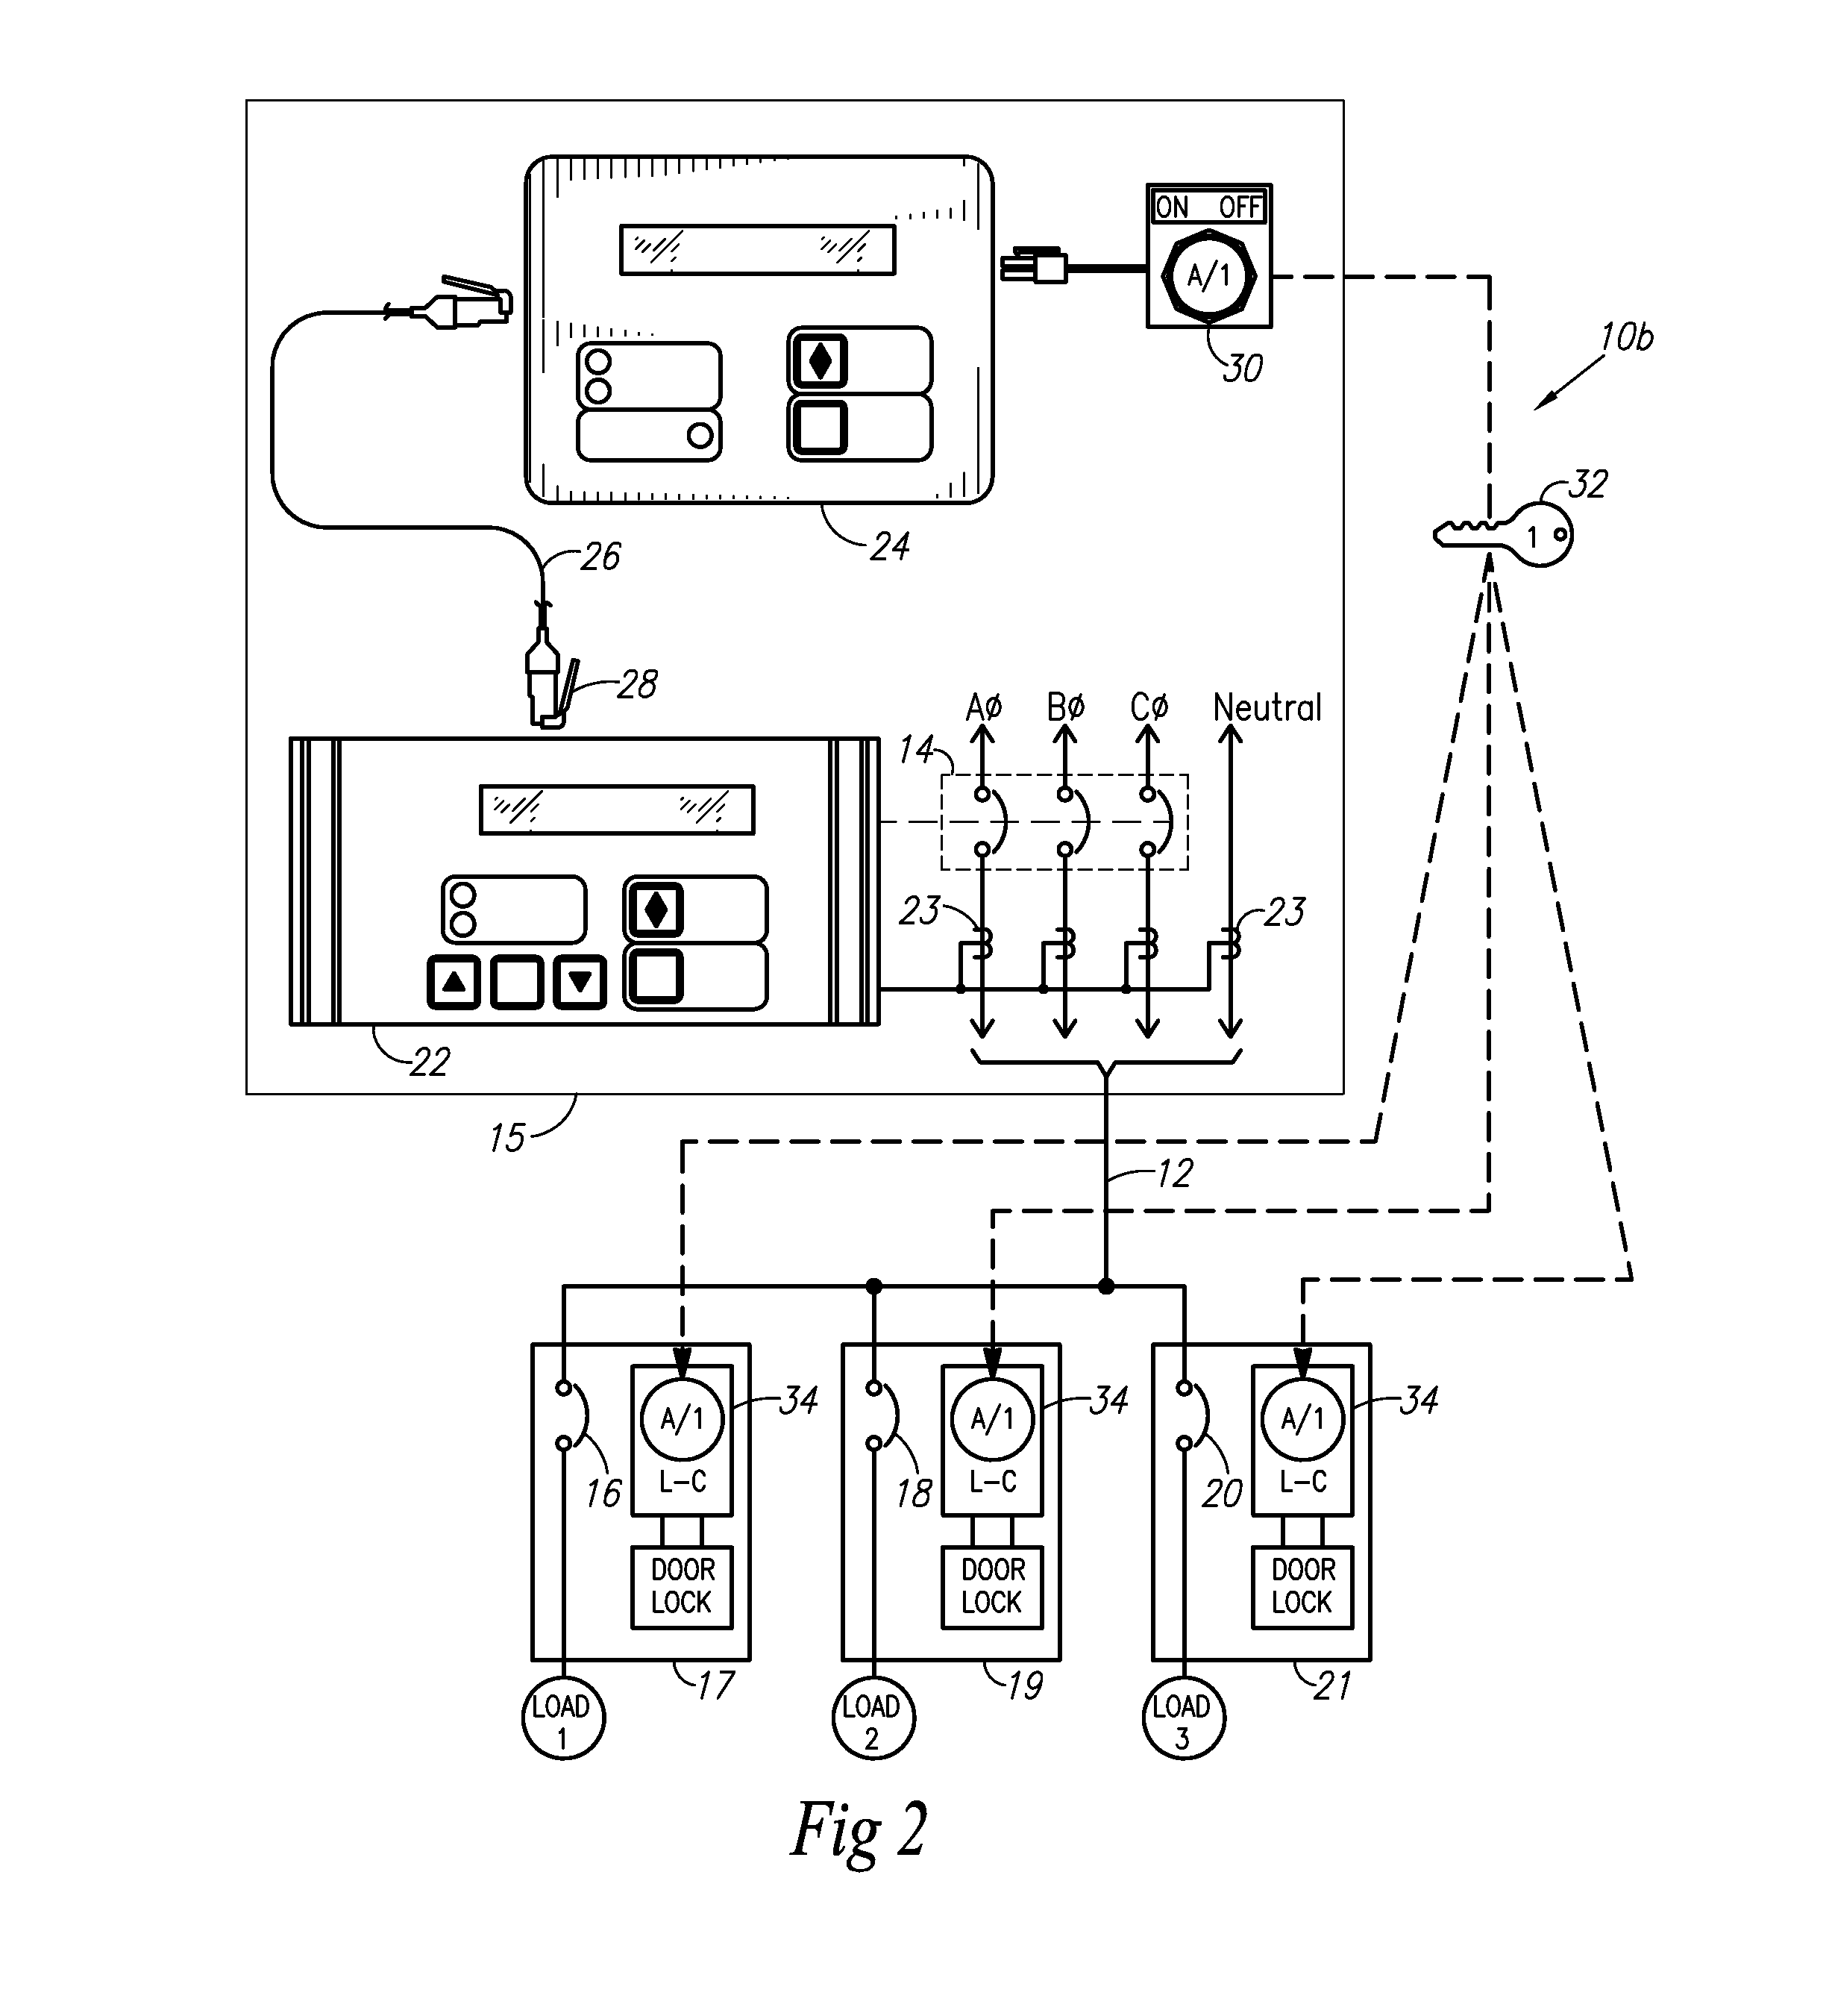 Manually-controlled arc flash energy reduction system and method for circuit breaker trip units